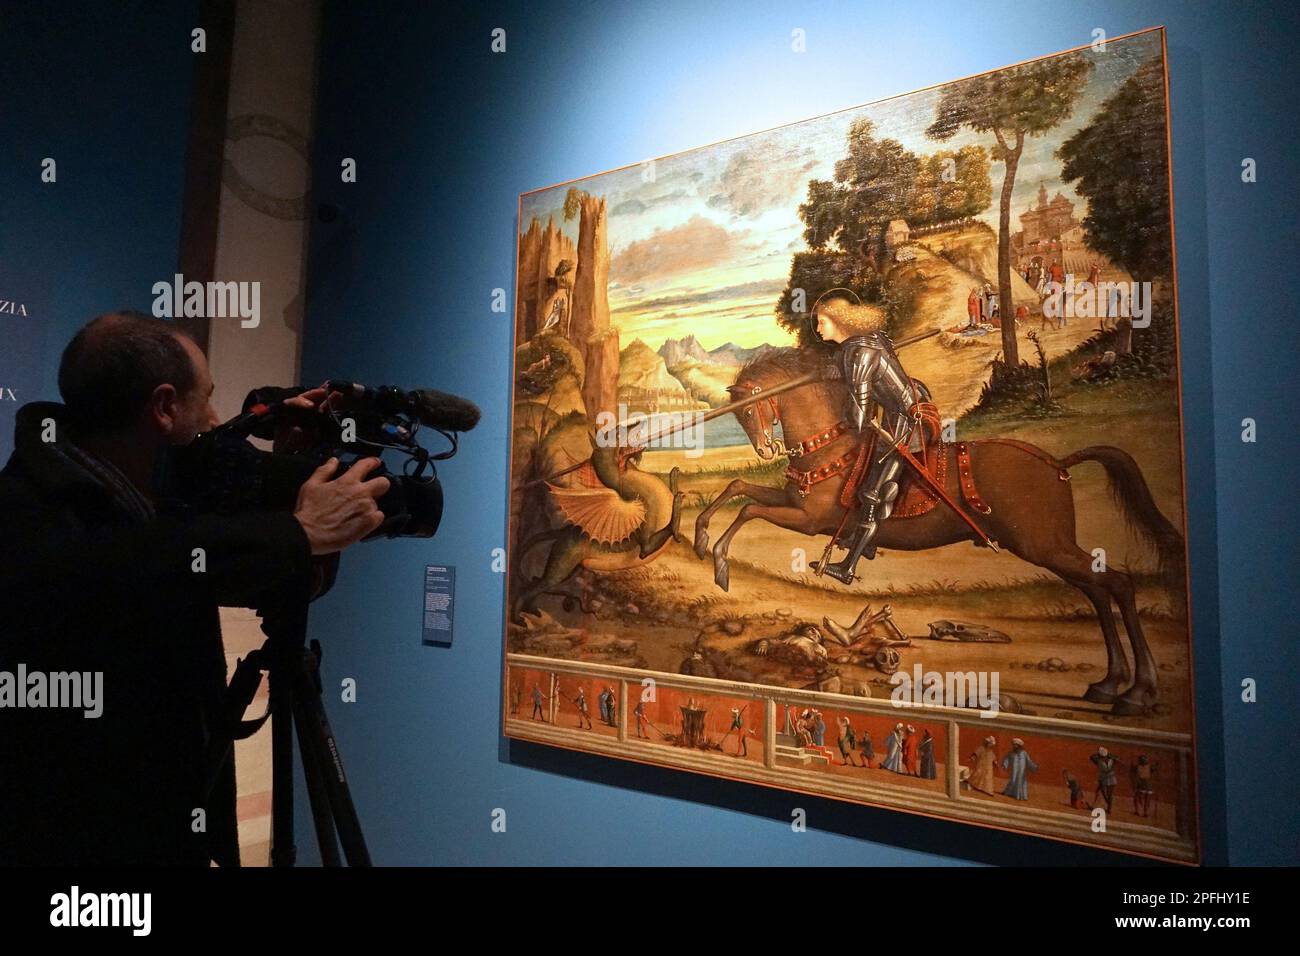 Venice, Italy. 17th Mar, 2023. A cameraman films 'San Giorgio killing the dragon', from the cycle of San'Orsola made by Vittore Carpaccio in 1516, today 17 March 2023 at the preview for the press at Palazzo Ducale. © ANDREA MEROLA A cameraman films 'Saint George kills the dragon', from the cycle of Saint Ursula made by Vittore Carpaccio in 1516, today 17 March 2023 at the press preview at Palazzo Ducale. © Andrew MEROLA Credit: Independent Photo Agency/Alamy Live News Stock Photo